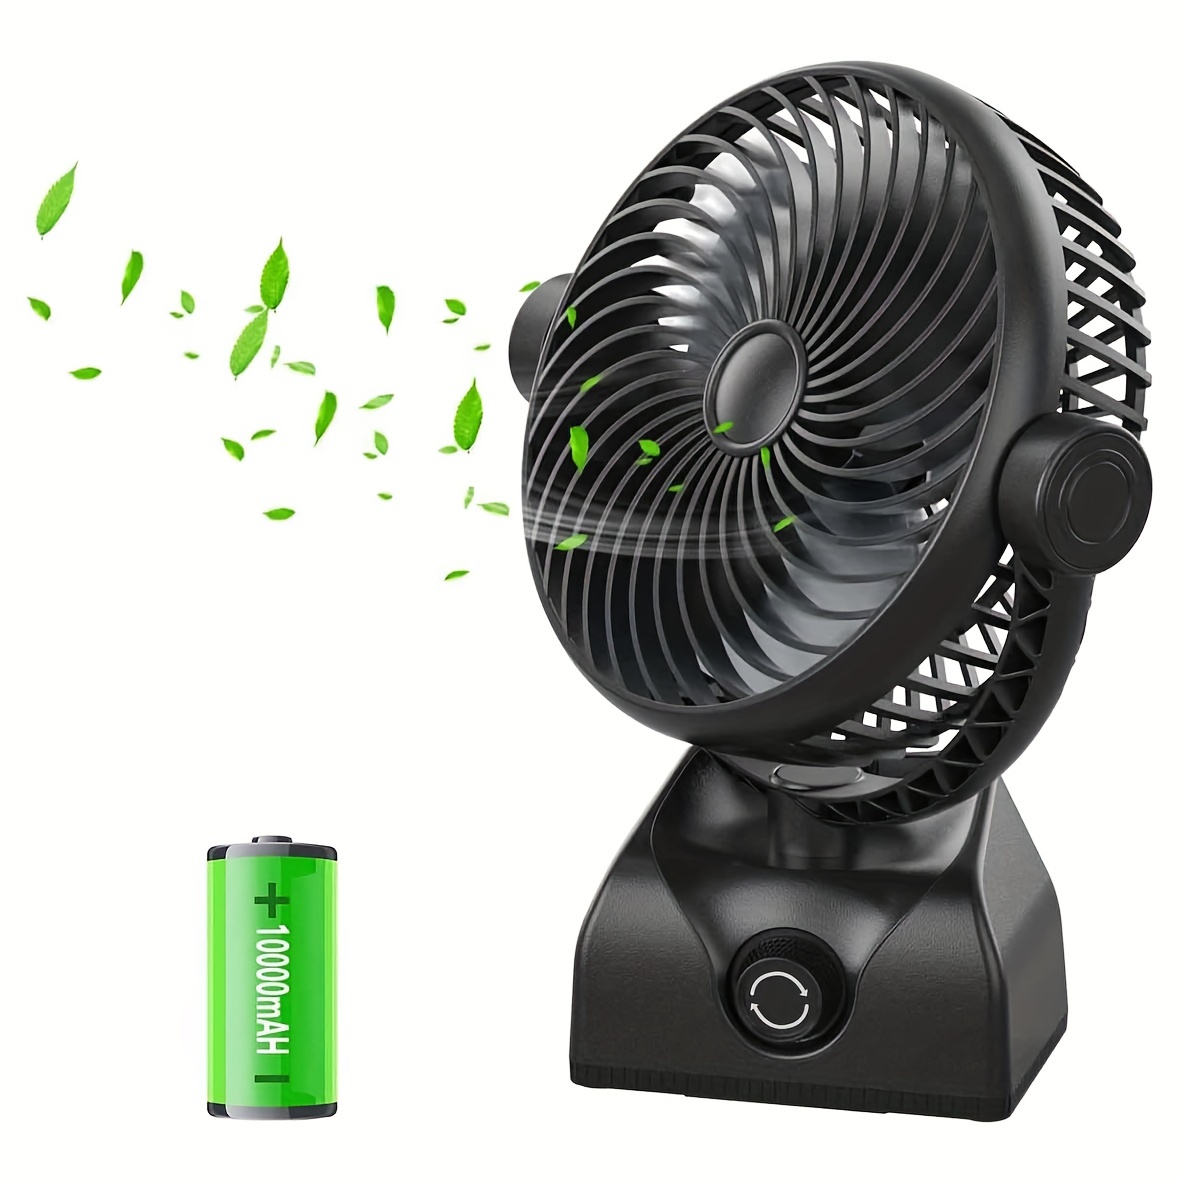  Mini Oscillating Desk Fan Small USB Fan Quiet Personal Table Fan  ual Adjustable Angle Desktop Air Circulate Fan with 4 Speed Portable Oscillation  Fan for Bedroom Outdoor Travel Camping : Home